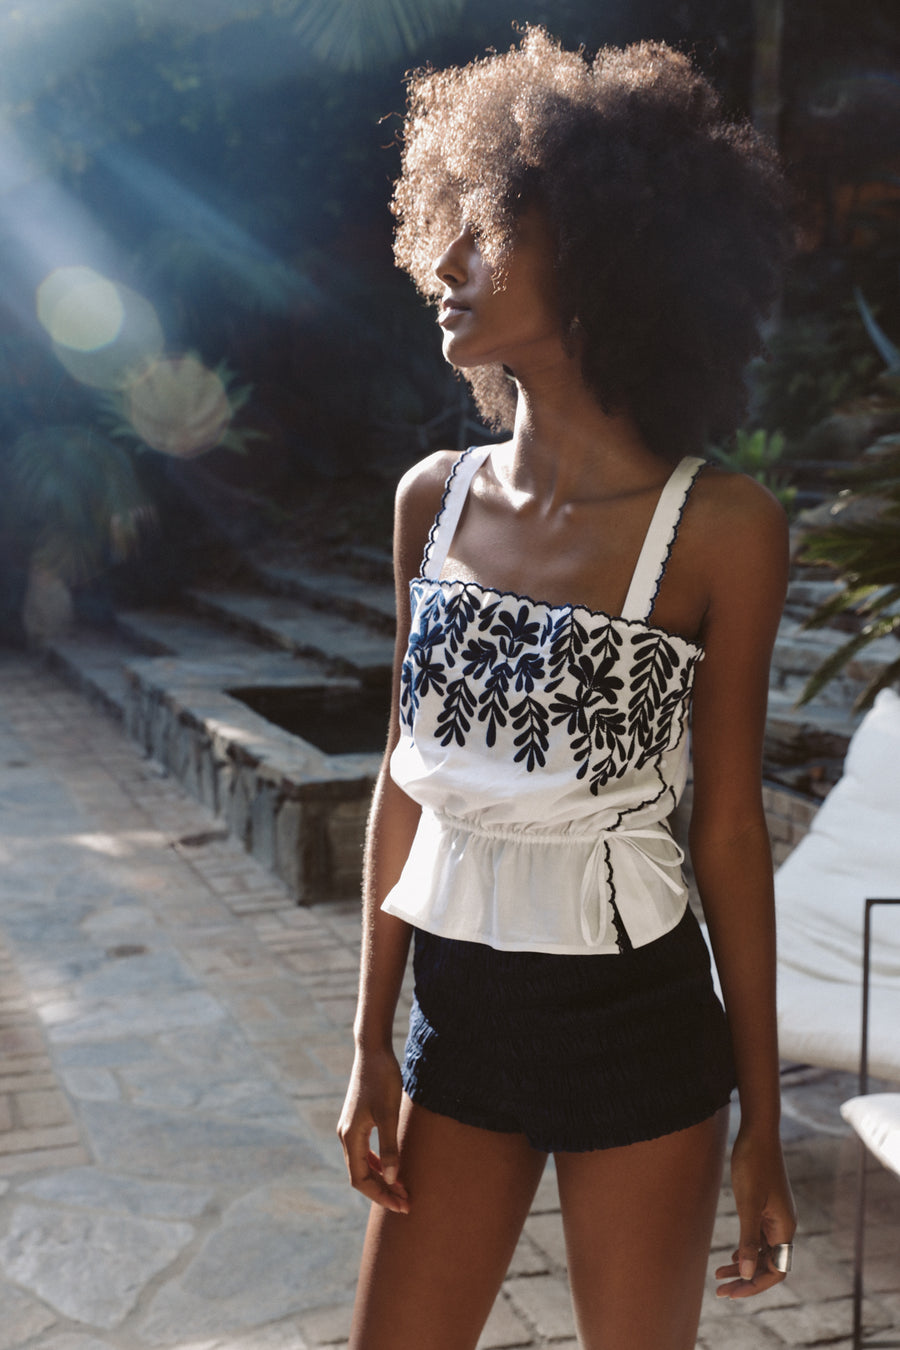 Lightweight 100% pima cotton camisole in white with indigo blue embroidered petals, delicate side covered buttons, and an adjustable drawstring waist.